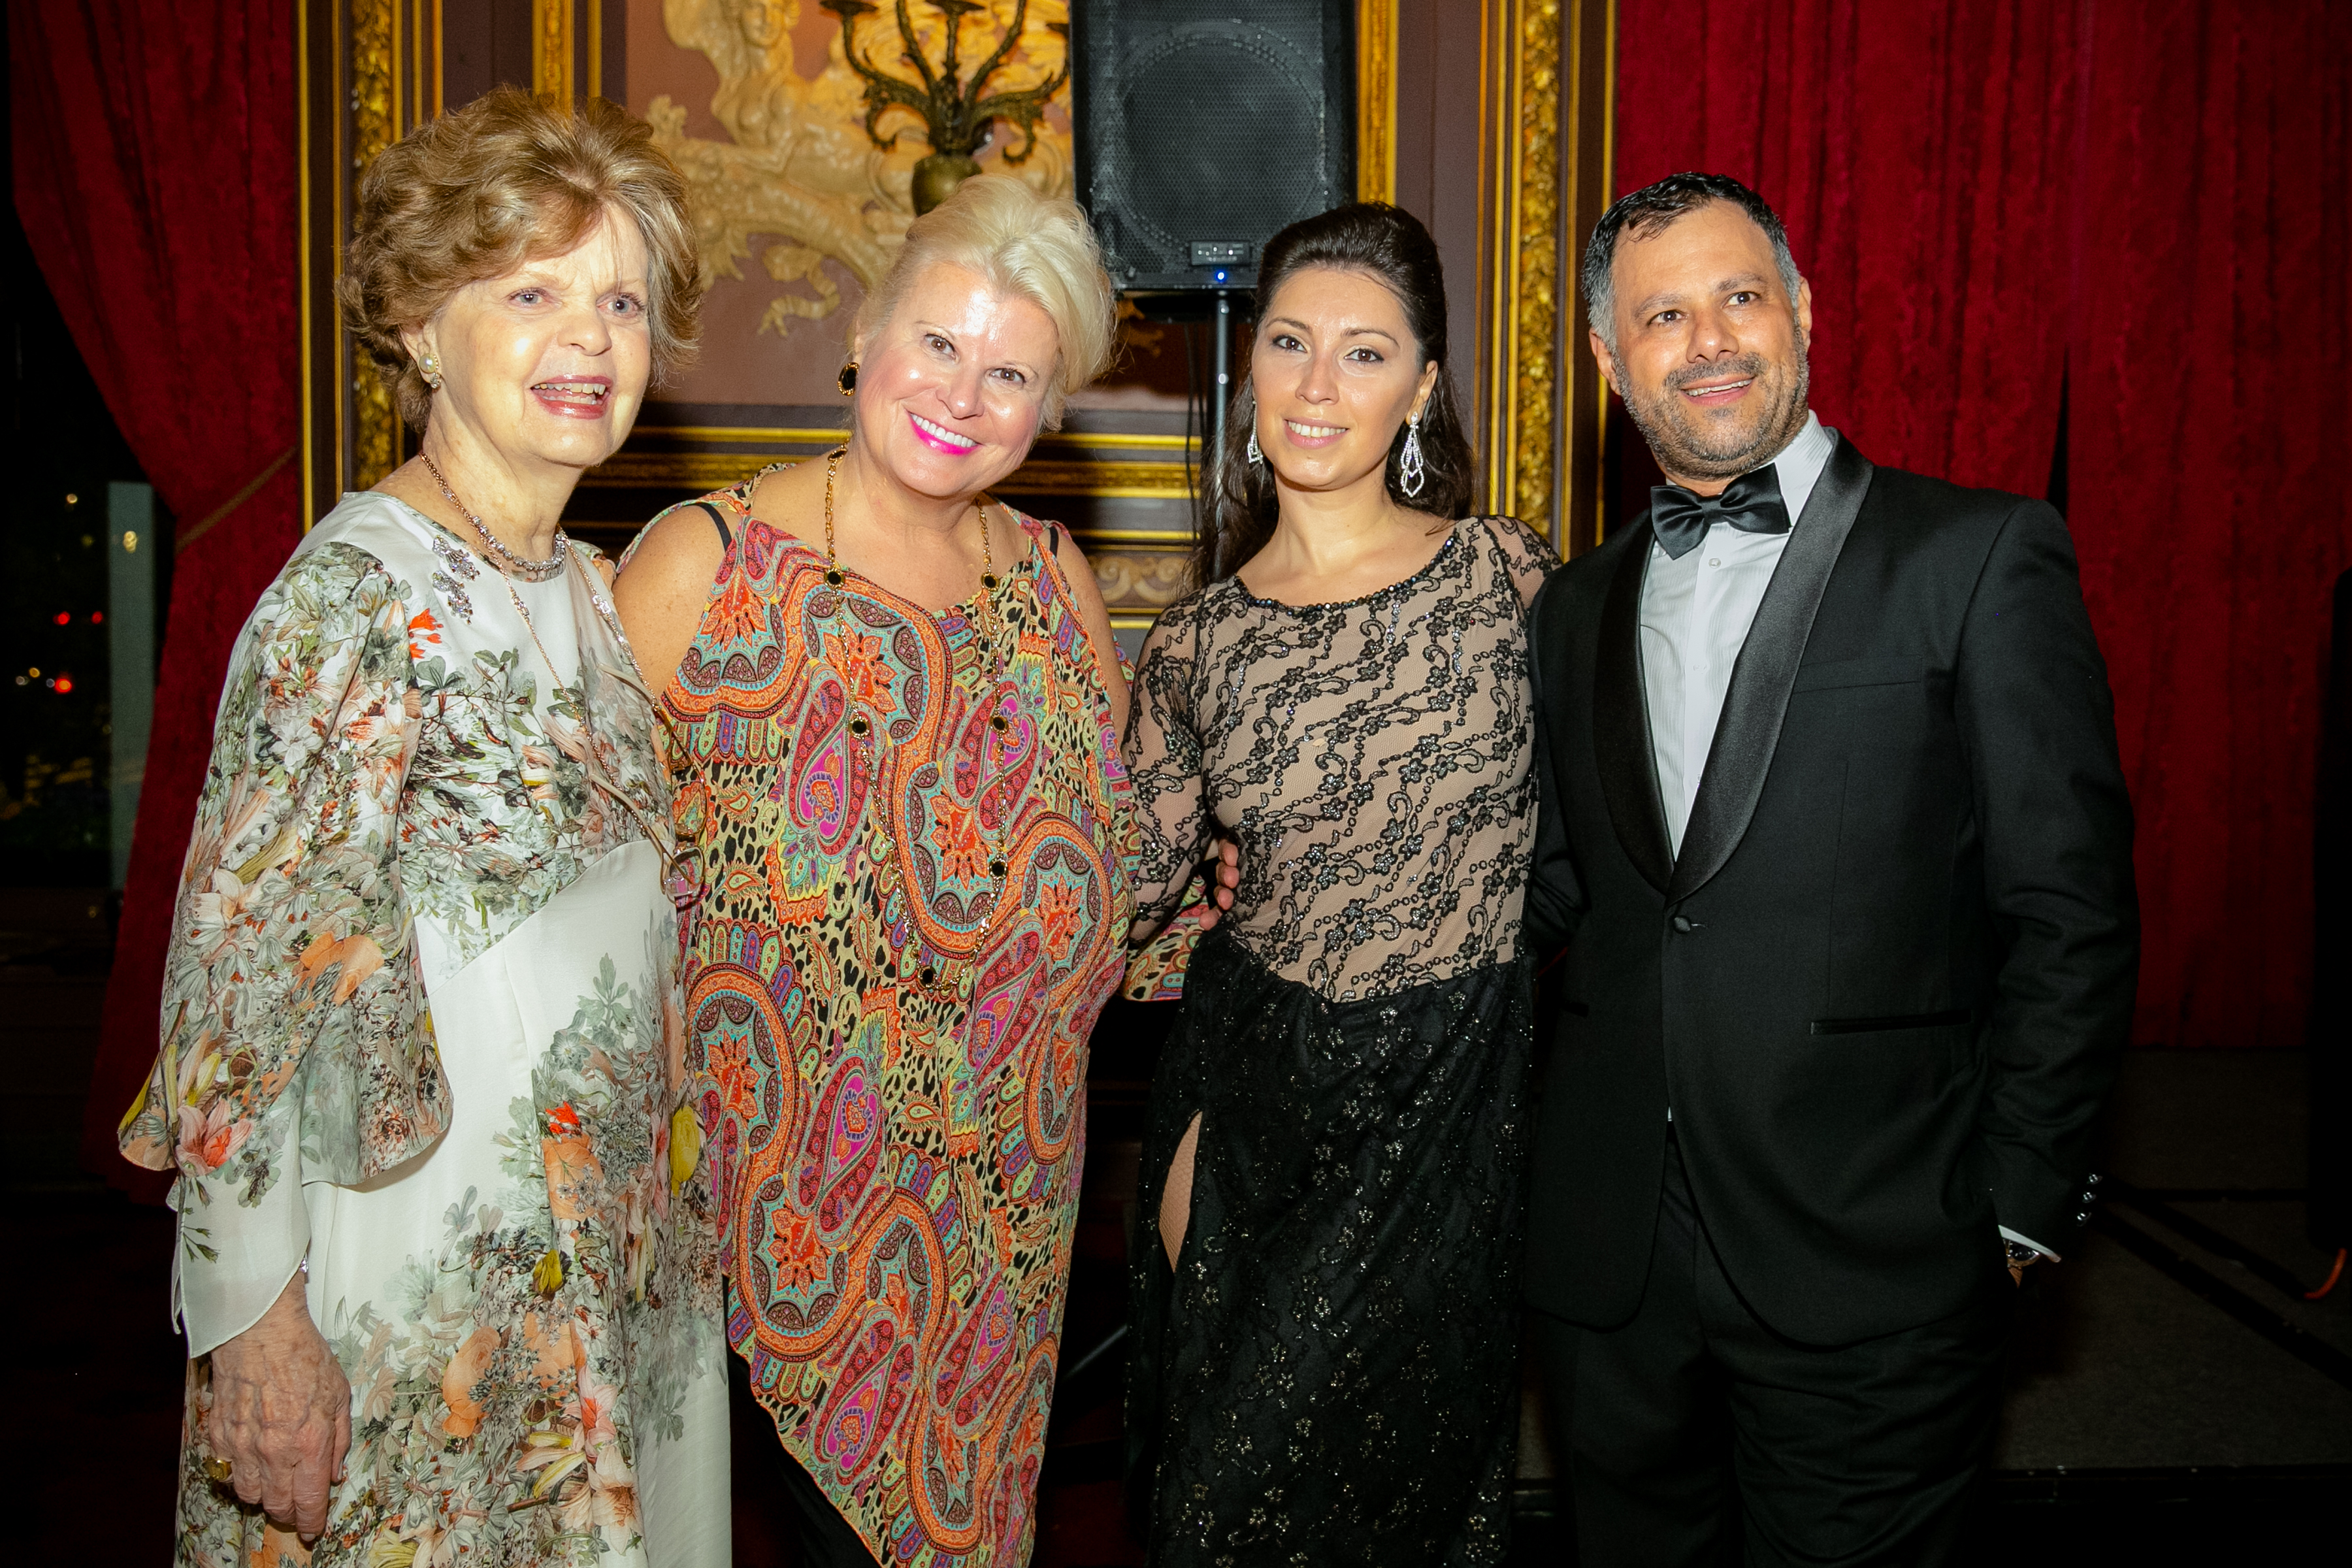 Dr. Legato pictured alongside smiling attendees at 2019 Gala Event